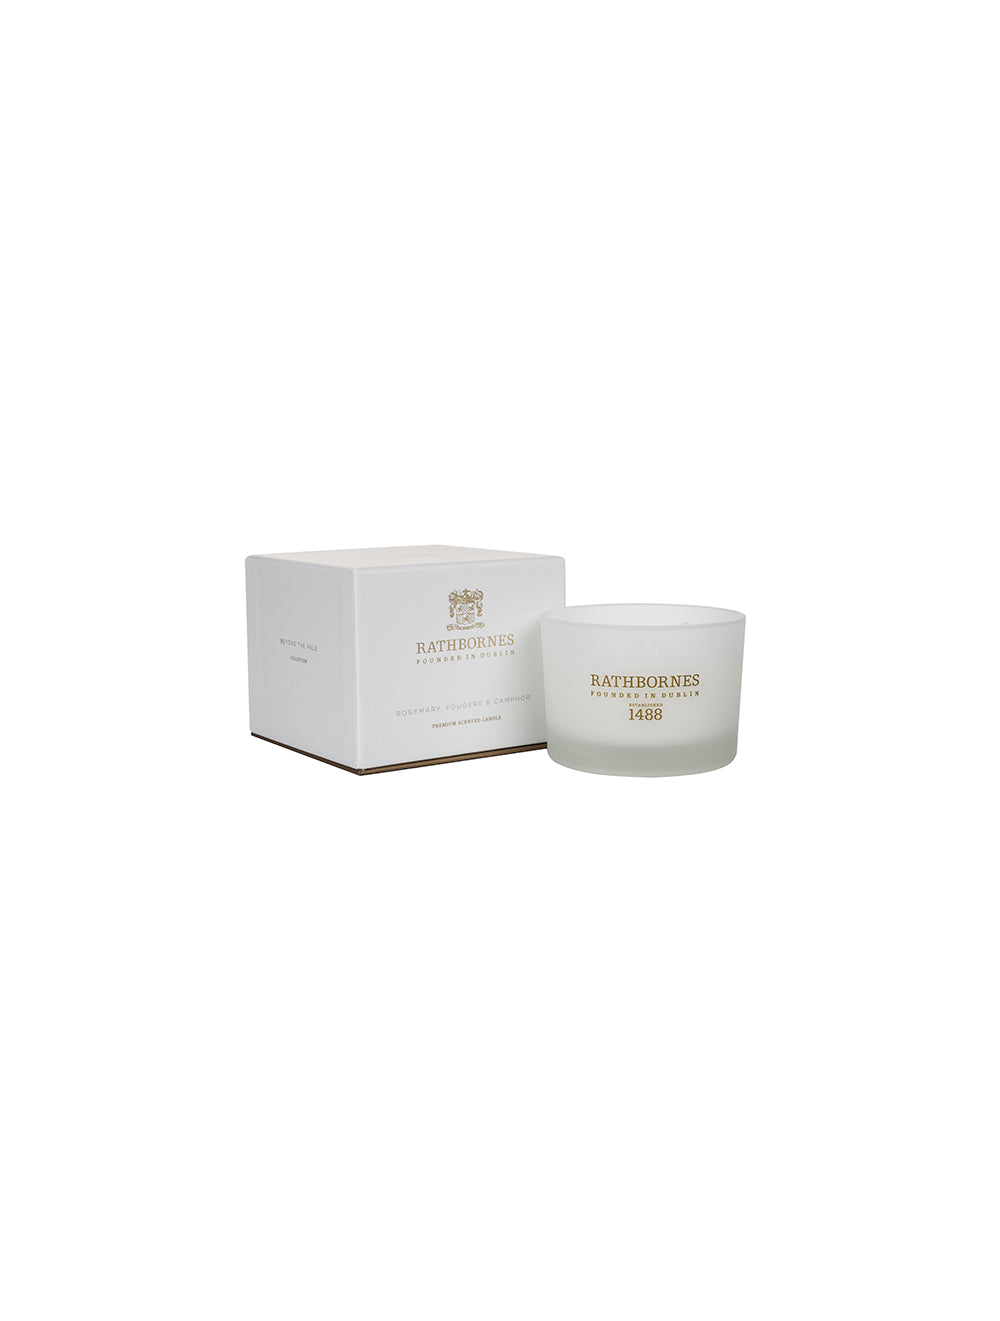 RATHBORNES Rosemary, Fougere & Camphor Classic Candle